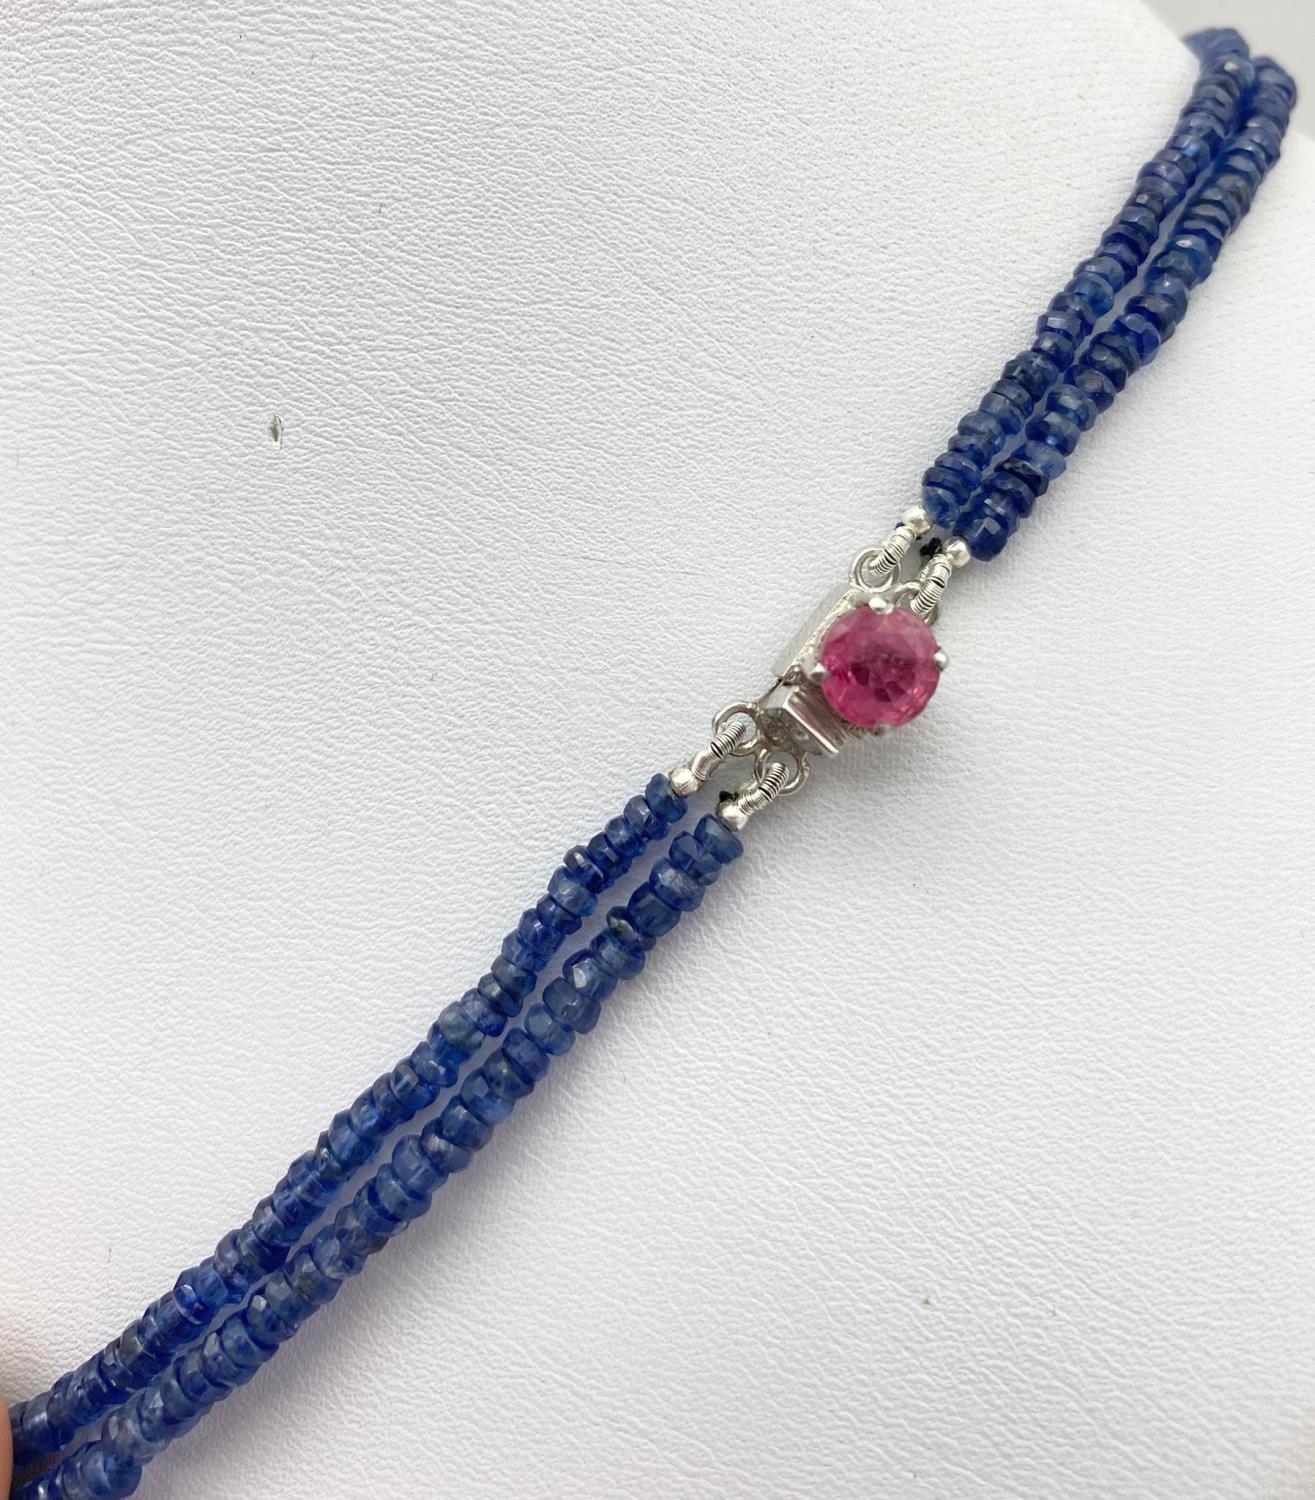 152cts of Kyanite Gemstone Two-Strand Necklace with Ruby Clasp in Sterling Silver. 44cm - Image 2 of 2